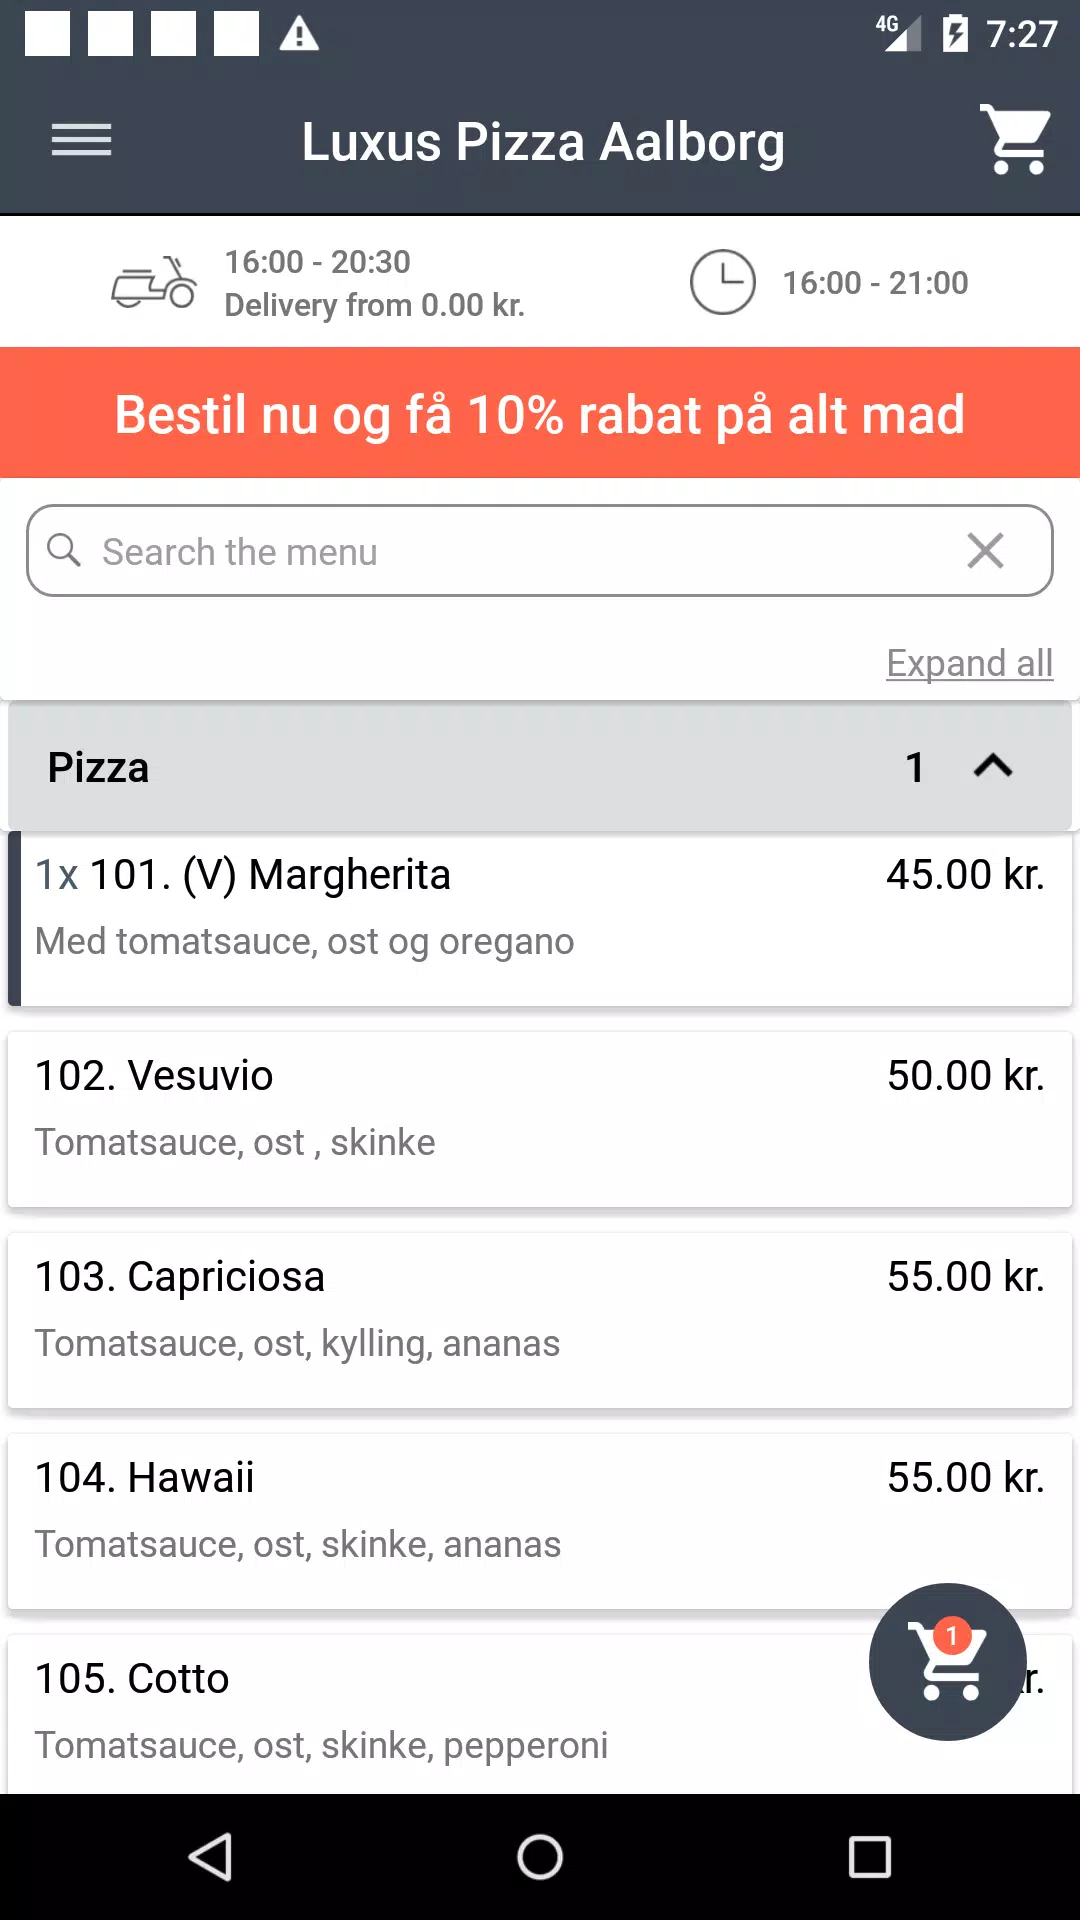 Luxus Pizza og Grill Aalborg for Android - APK Download